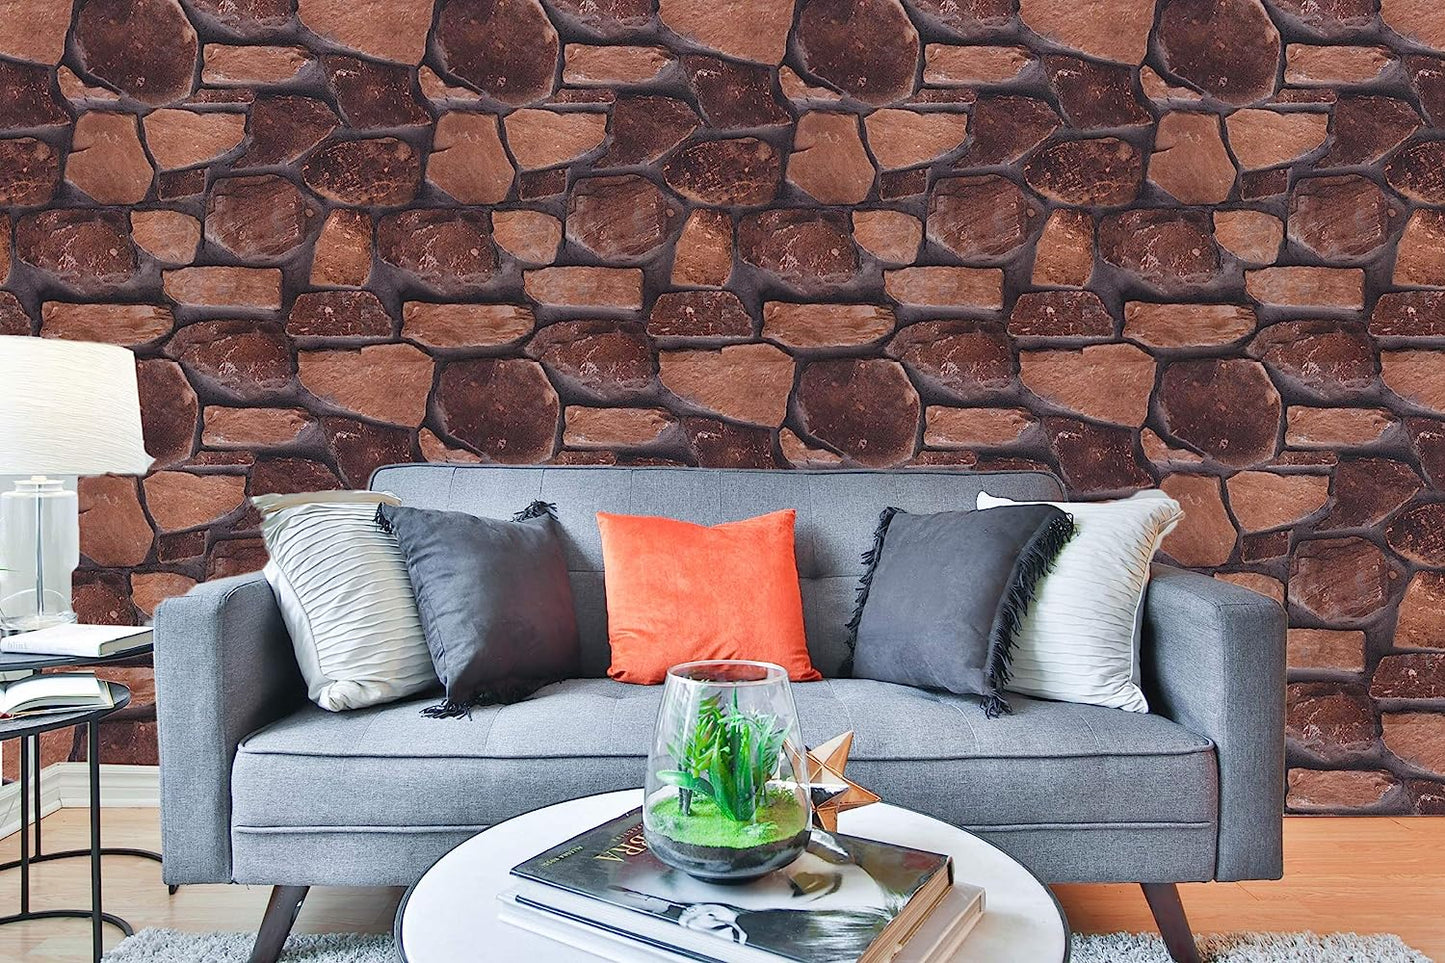 3D Latest Stone Design Dark Brown Wallpaper Roll for Home Walls 57 Sq Ft (0.53m or 21 Inches x 10m or 33 Feet)